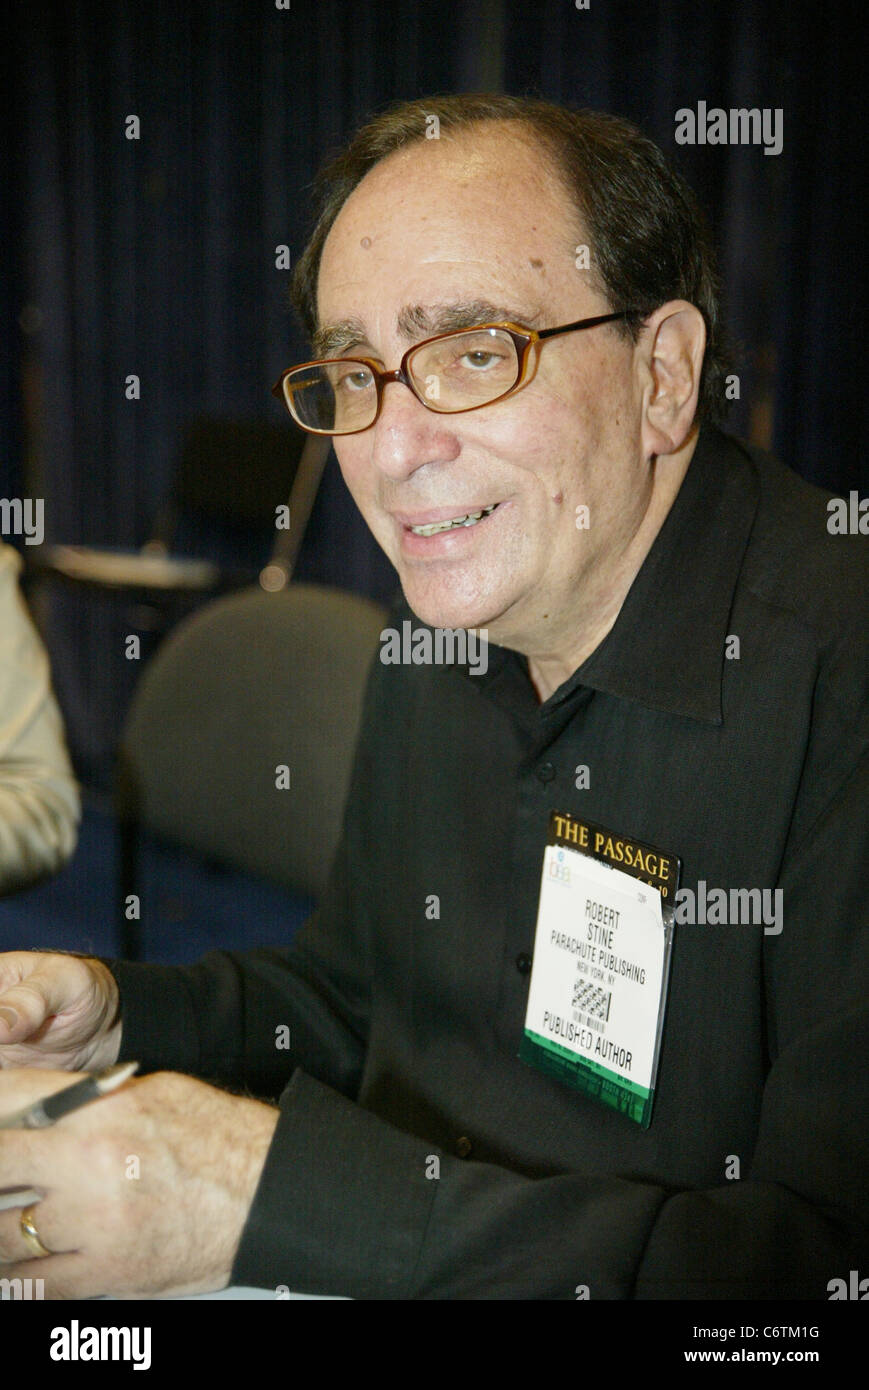 RL Stine BEA (Book Expo America) 2010 Day Two held at the Jacob Javits Center New York City, USA 0 27.05.10 Stock Photo